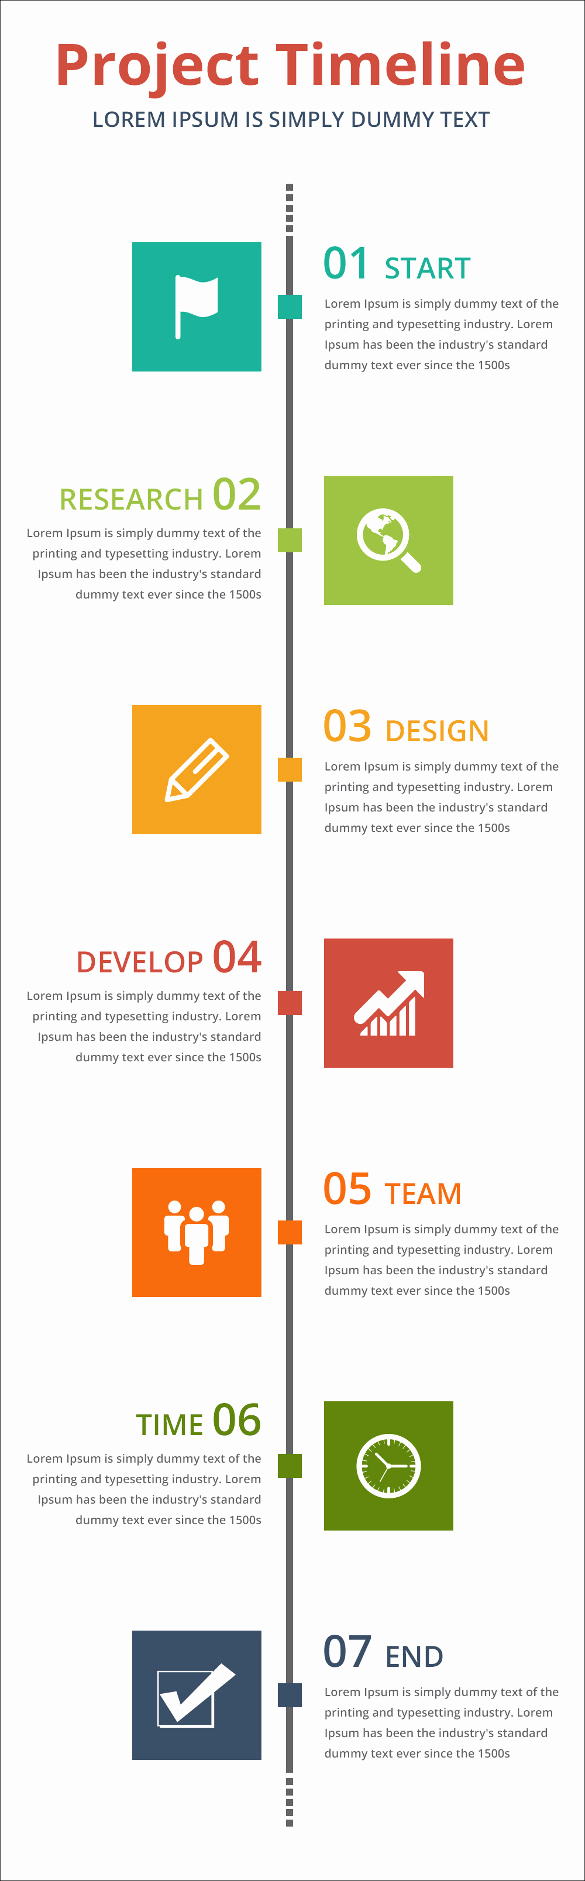 Project Timeline Template Word Fresh Project Timeline Templates 19 Free Word Ppt format